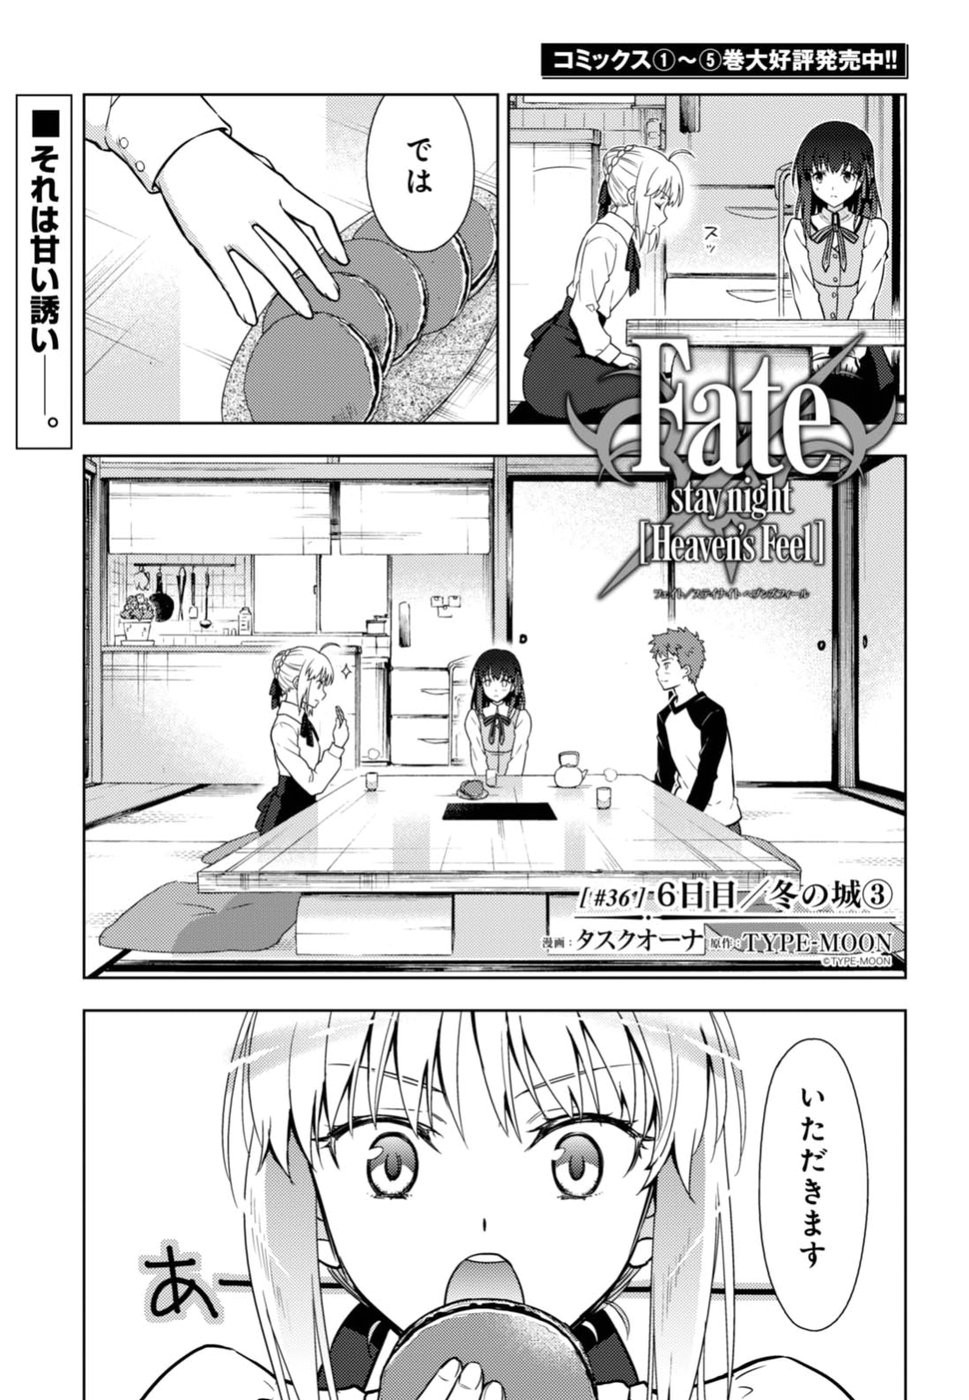 Fate/Stay night Heaven's Feel - Chapter 36 - Page 1